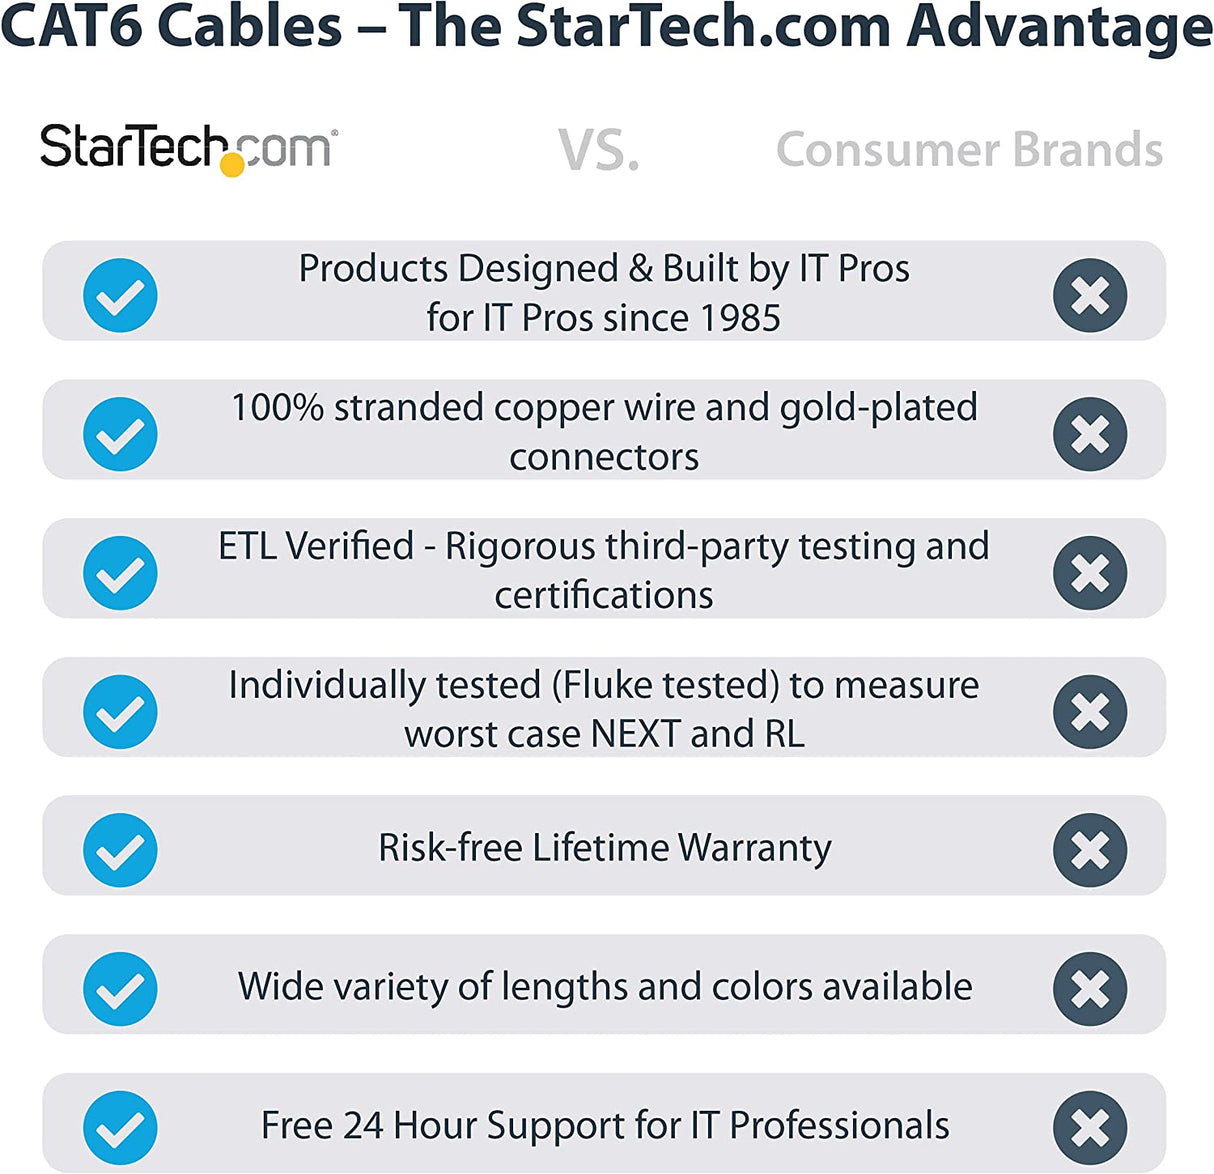 StarTech.com 35ft CAT6 Ethernet Cable - Black CAT 6 Gigabit Ethernet Wire -650MHz 100W PoE RJ45 UTP Network/Patch Cord Snagless w/Strain Relief Fluke Tested/Wiring is UL Certified/TIA (N6PATCH35BK) Black 35 ft / 10.6 m 1 Pack